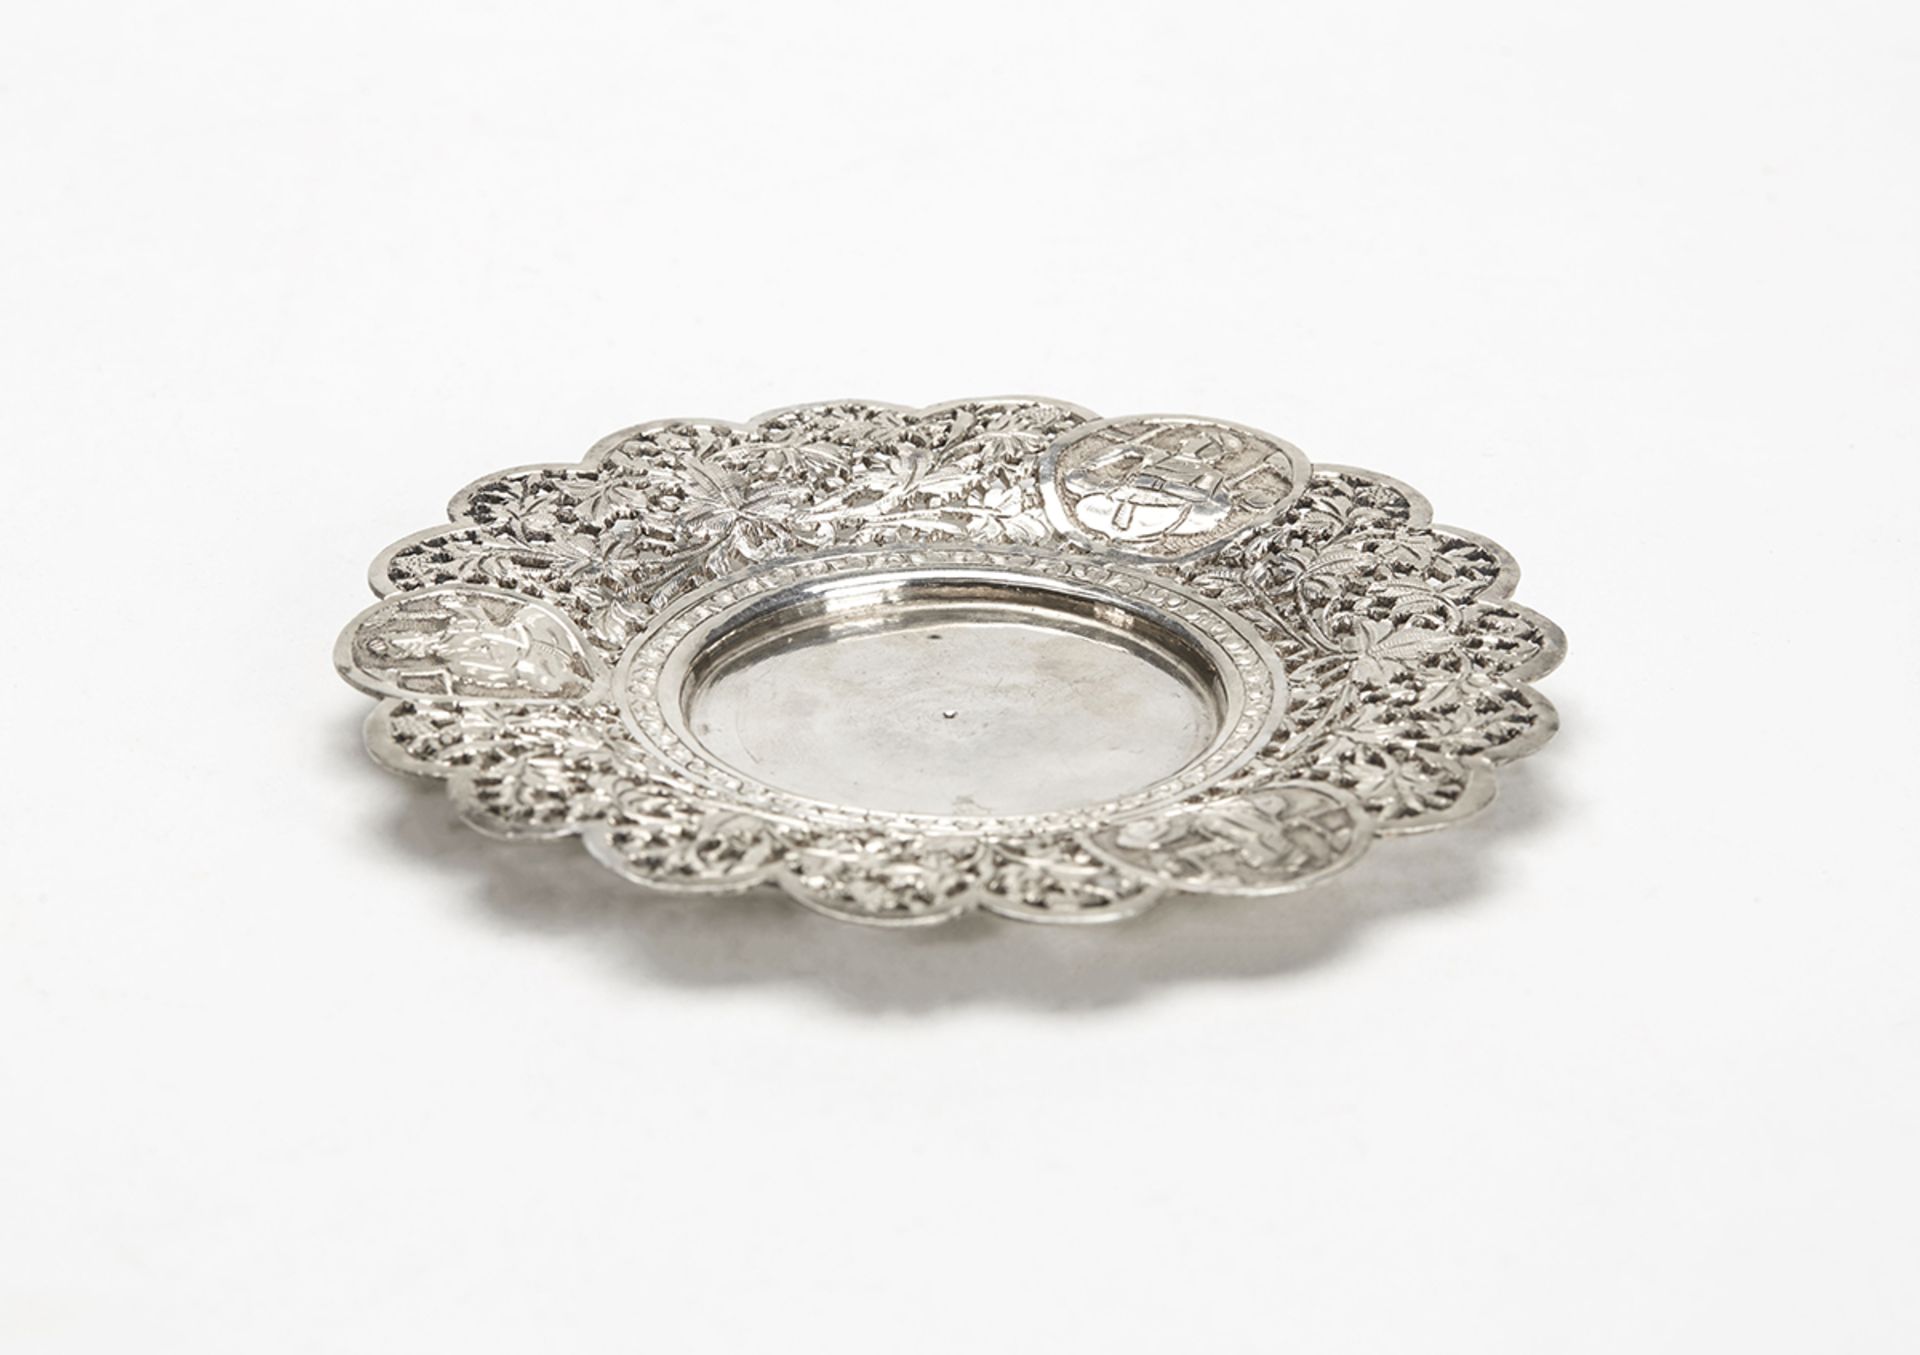 Antique Indian/Asian Silver Reticulated Dish Or Stand 19C. - Image 7 of 7